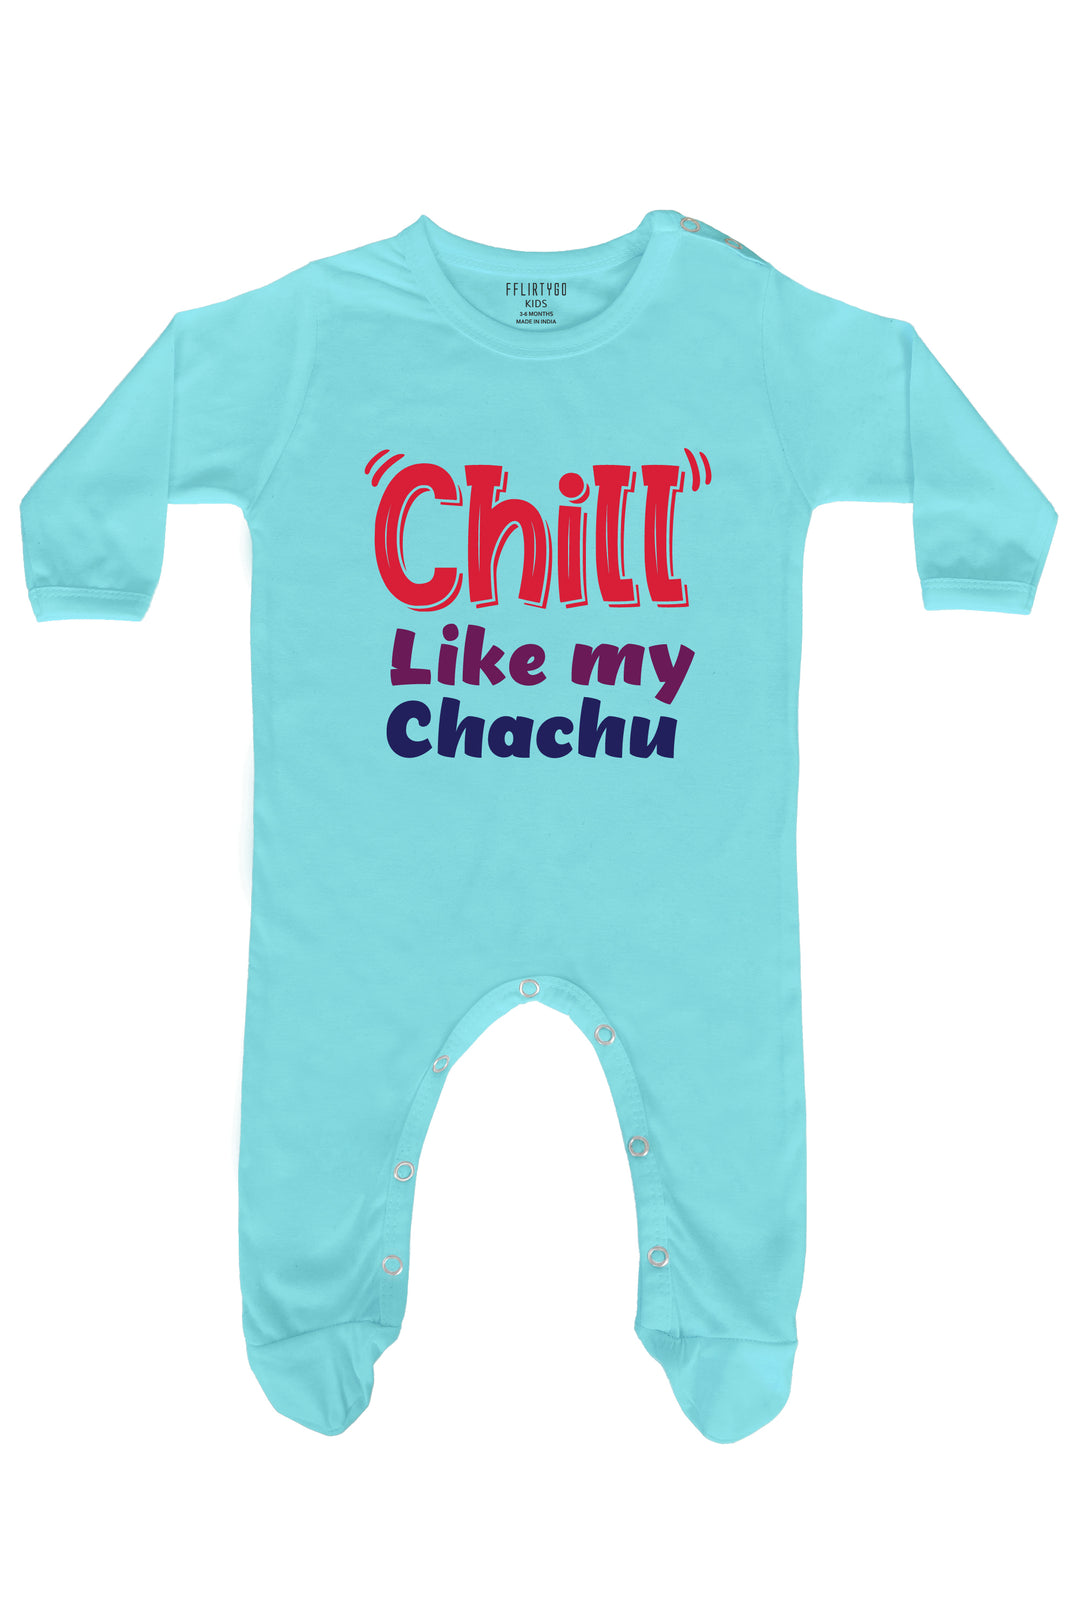 Chill Like My Chachu Baby Romper | Onesies